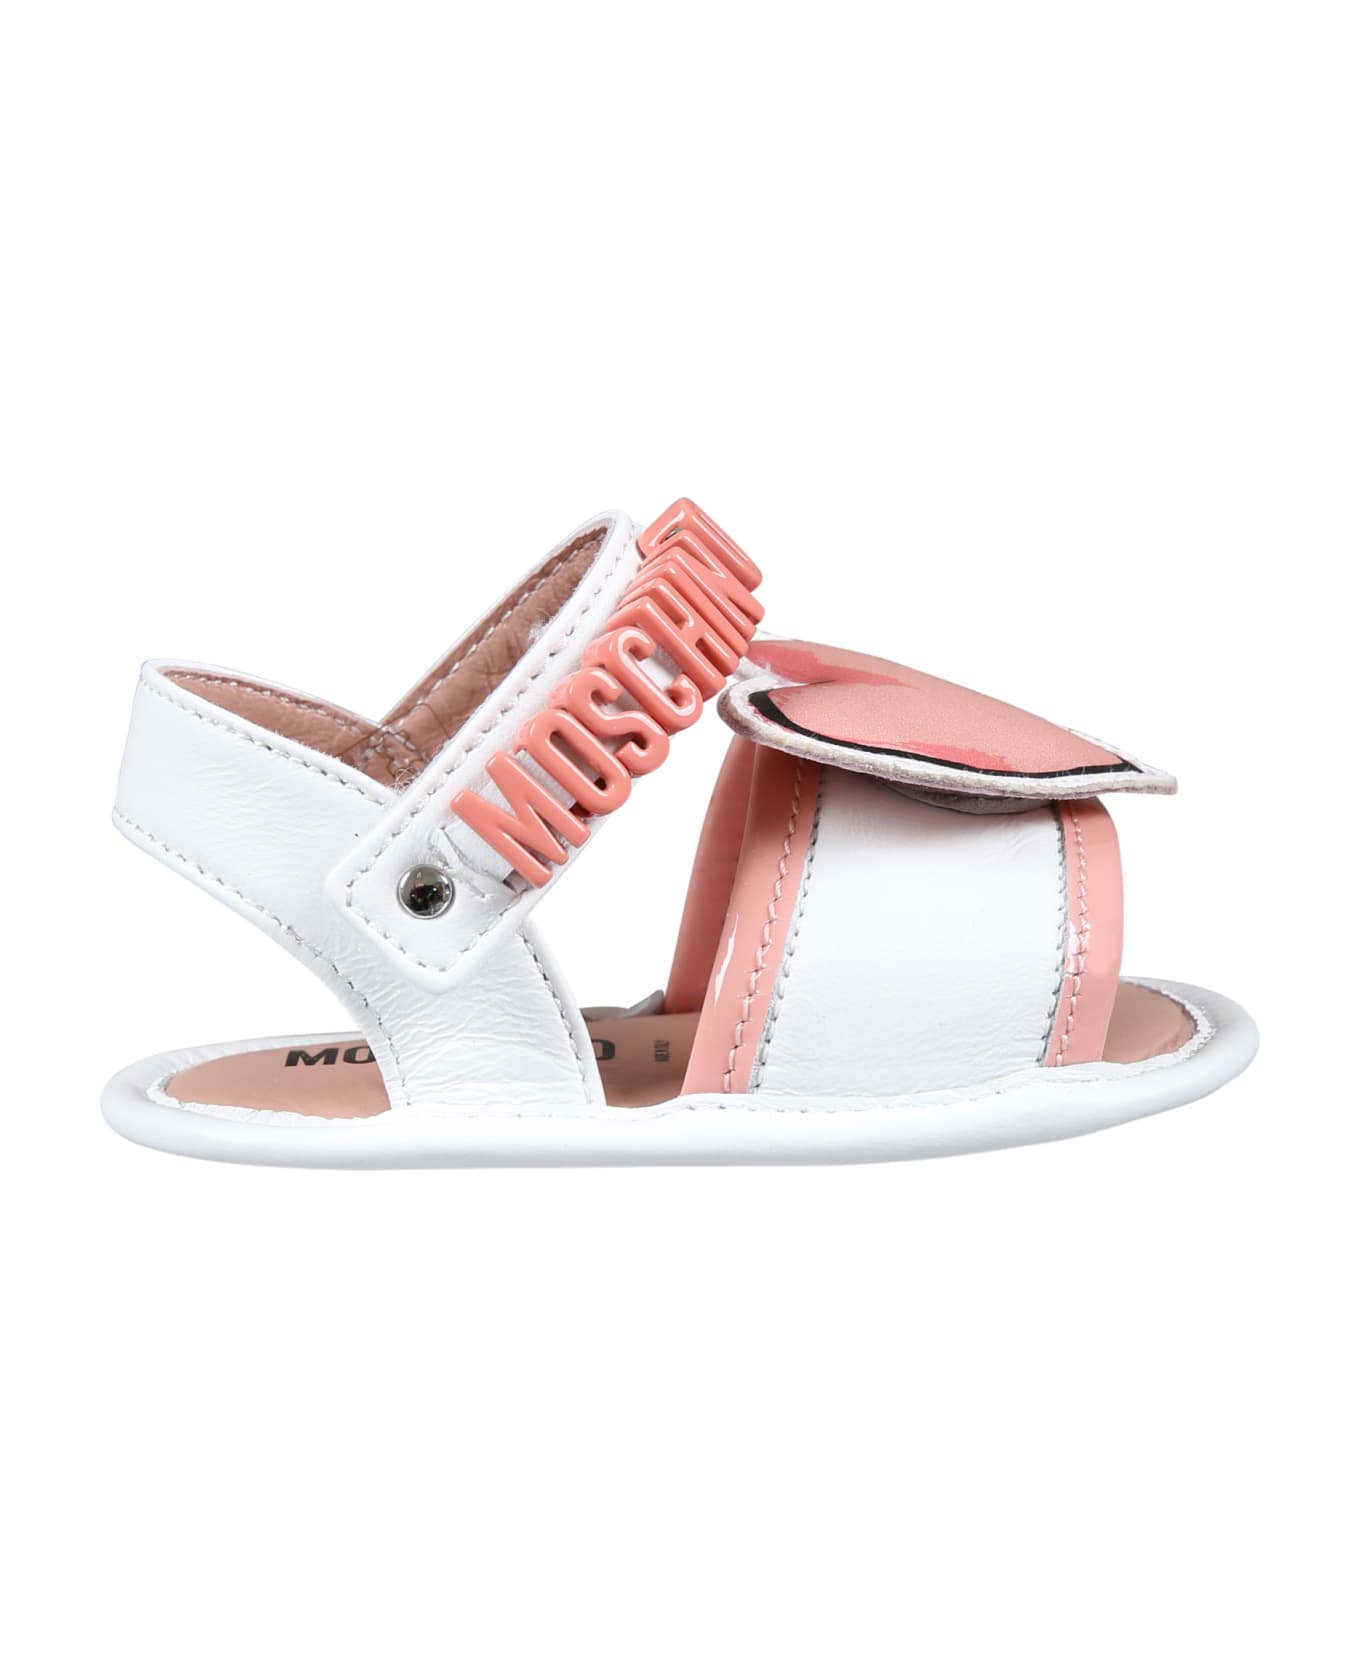 Moschino White Sandals For Baby Girl With Heart - White